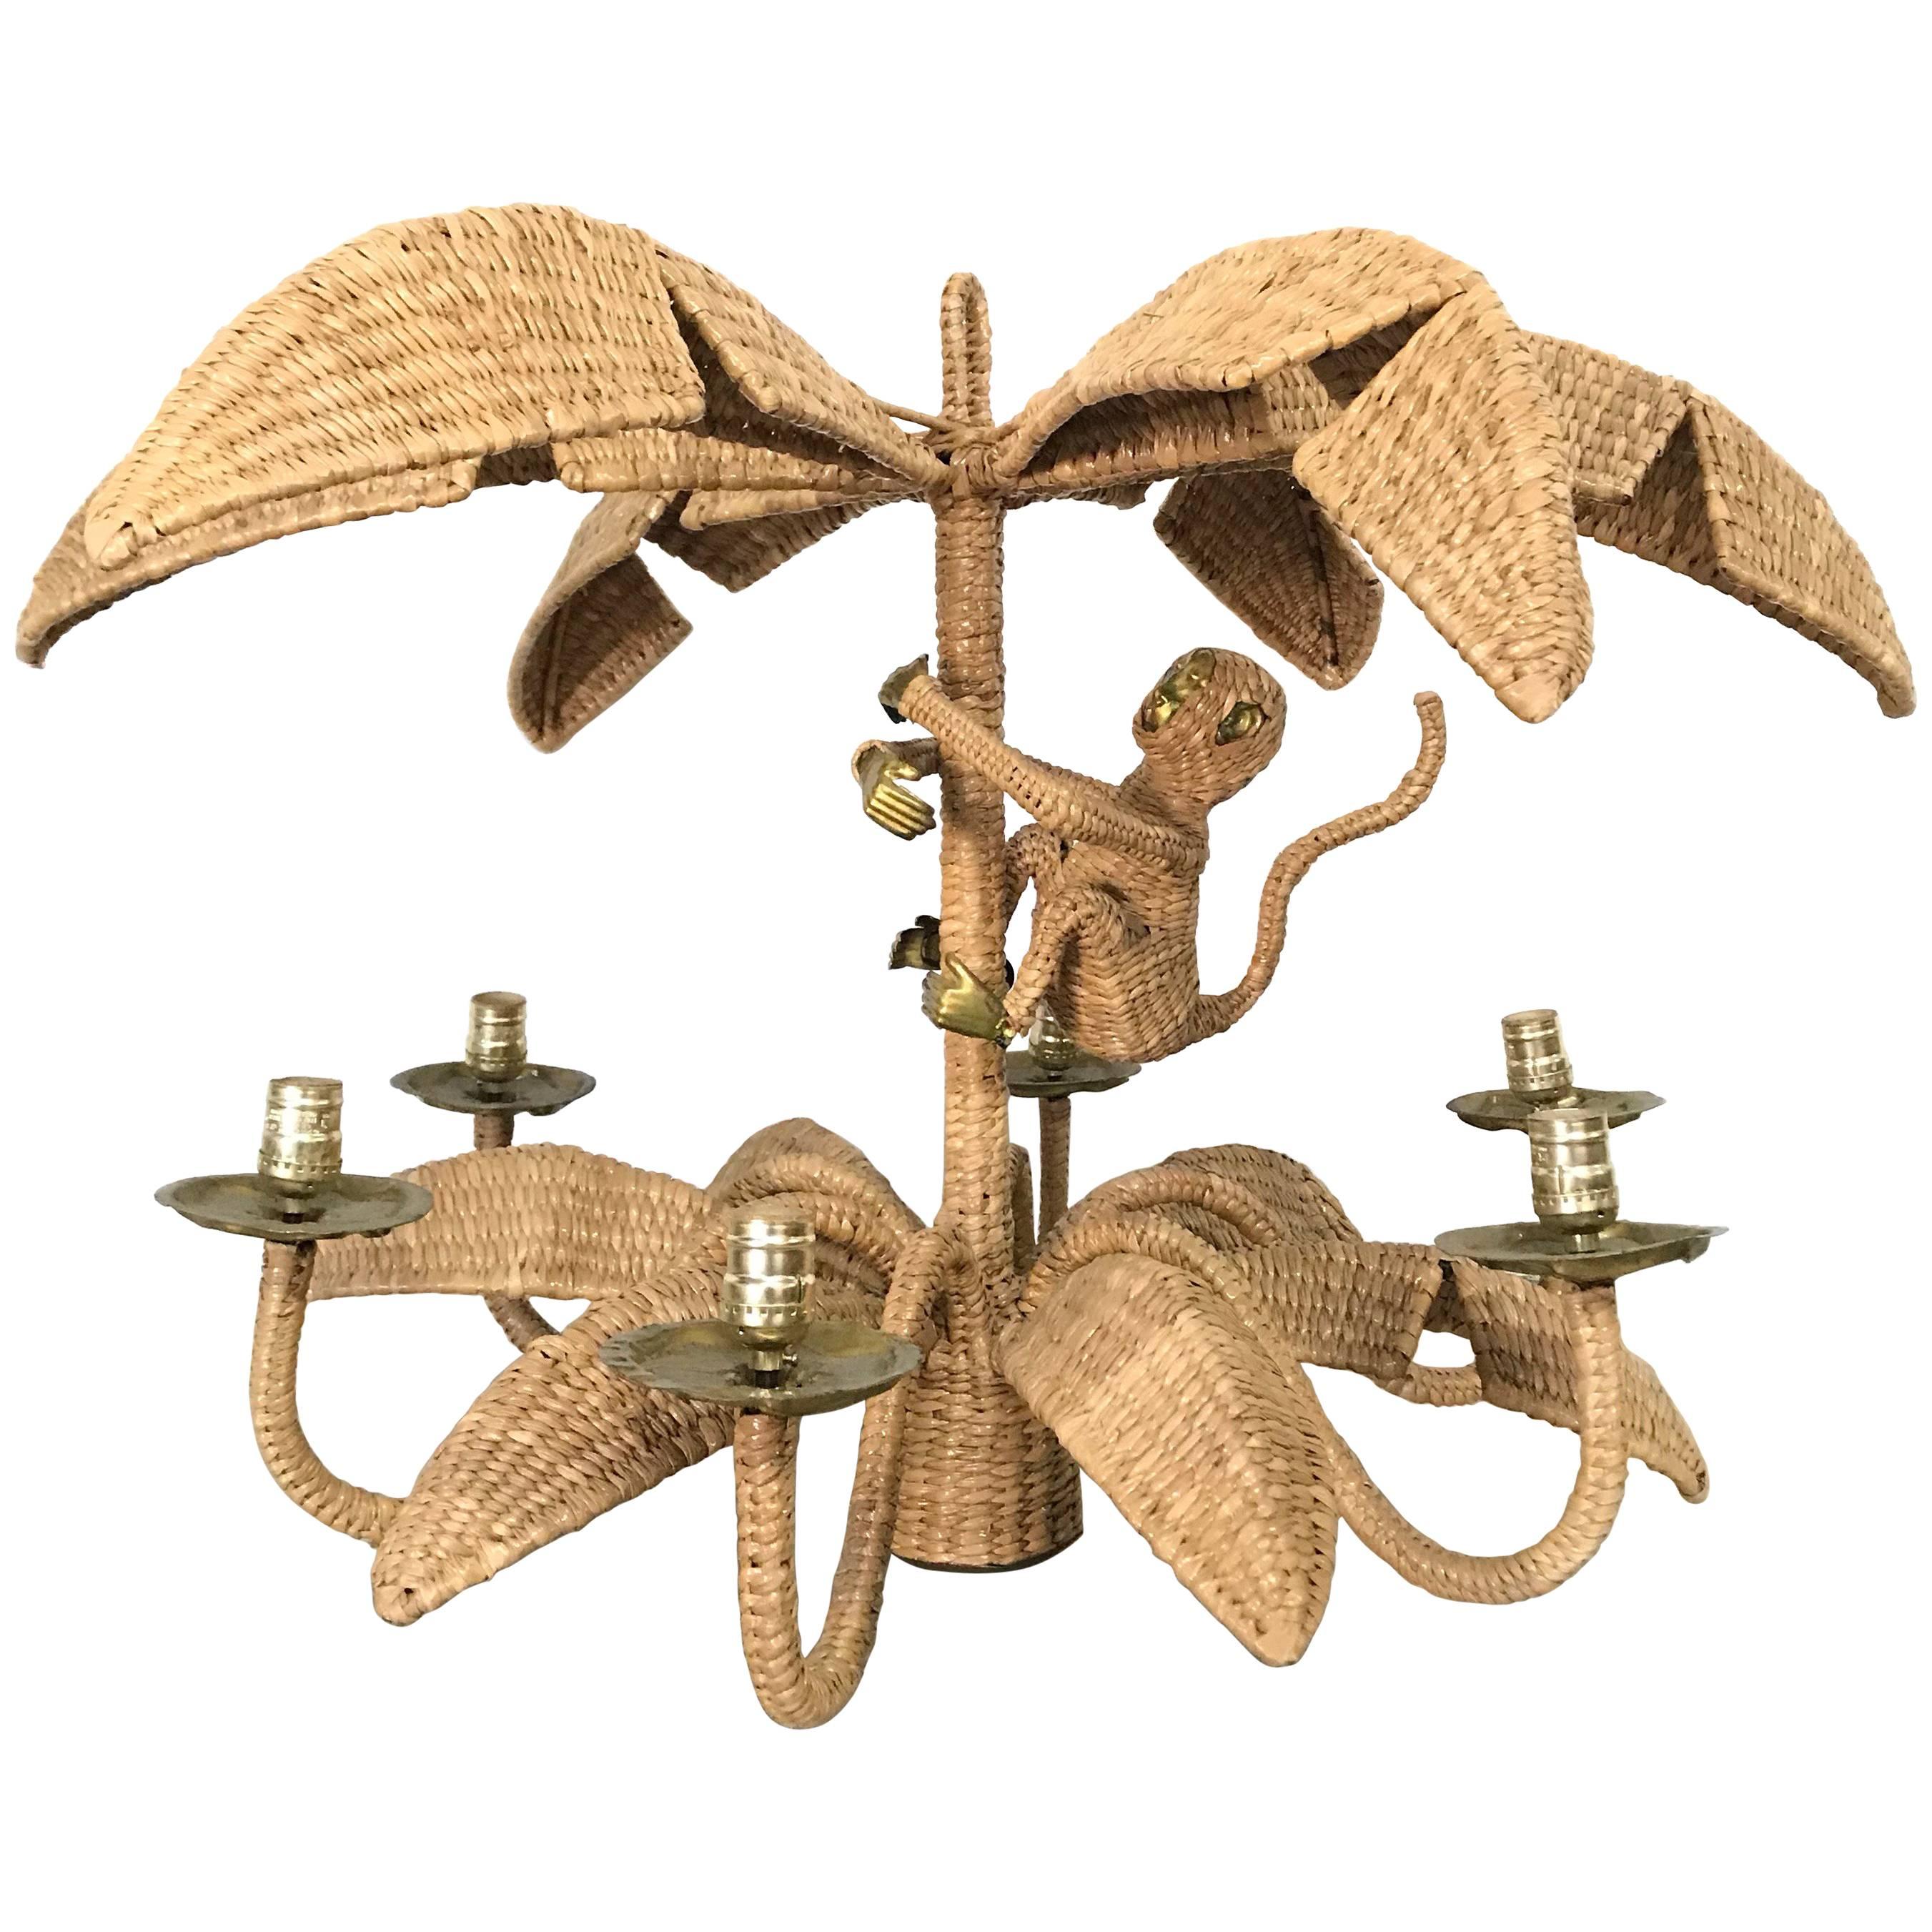 Mario Torres Woven Wicker Palm and Monkey Chandelier